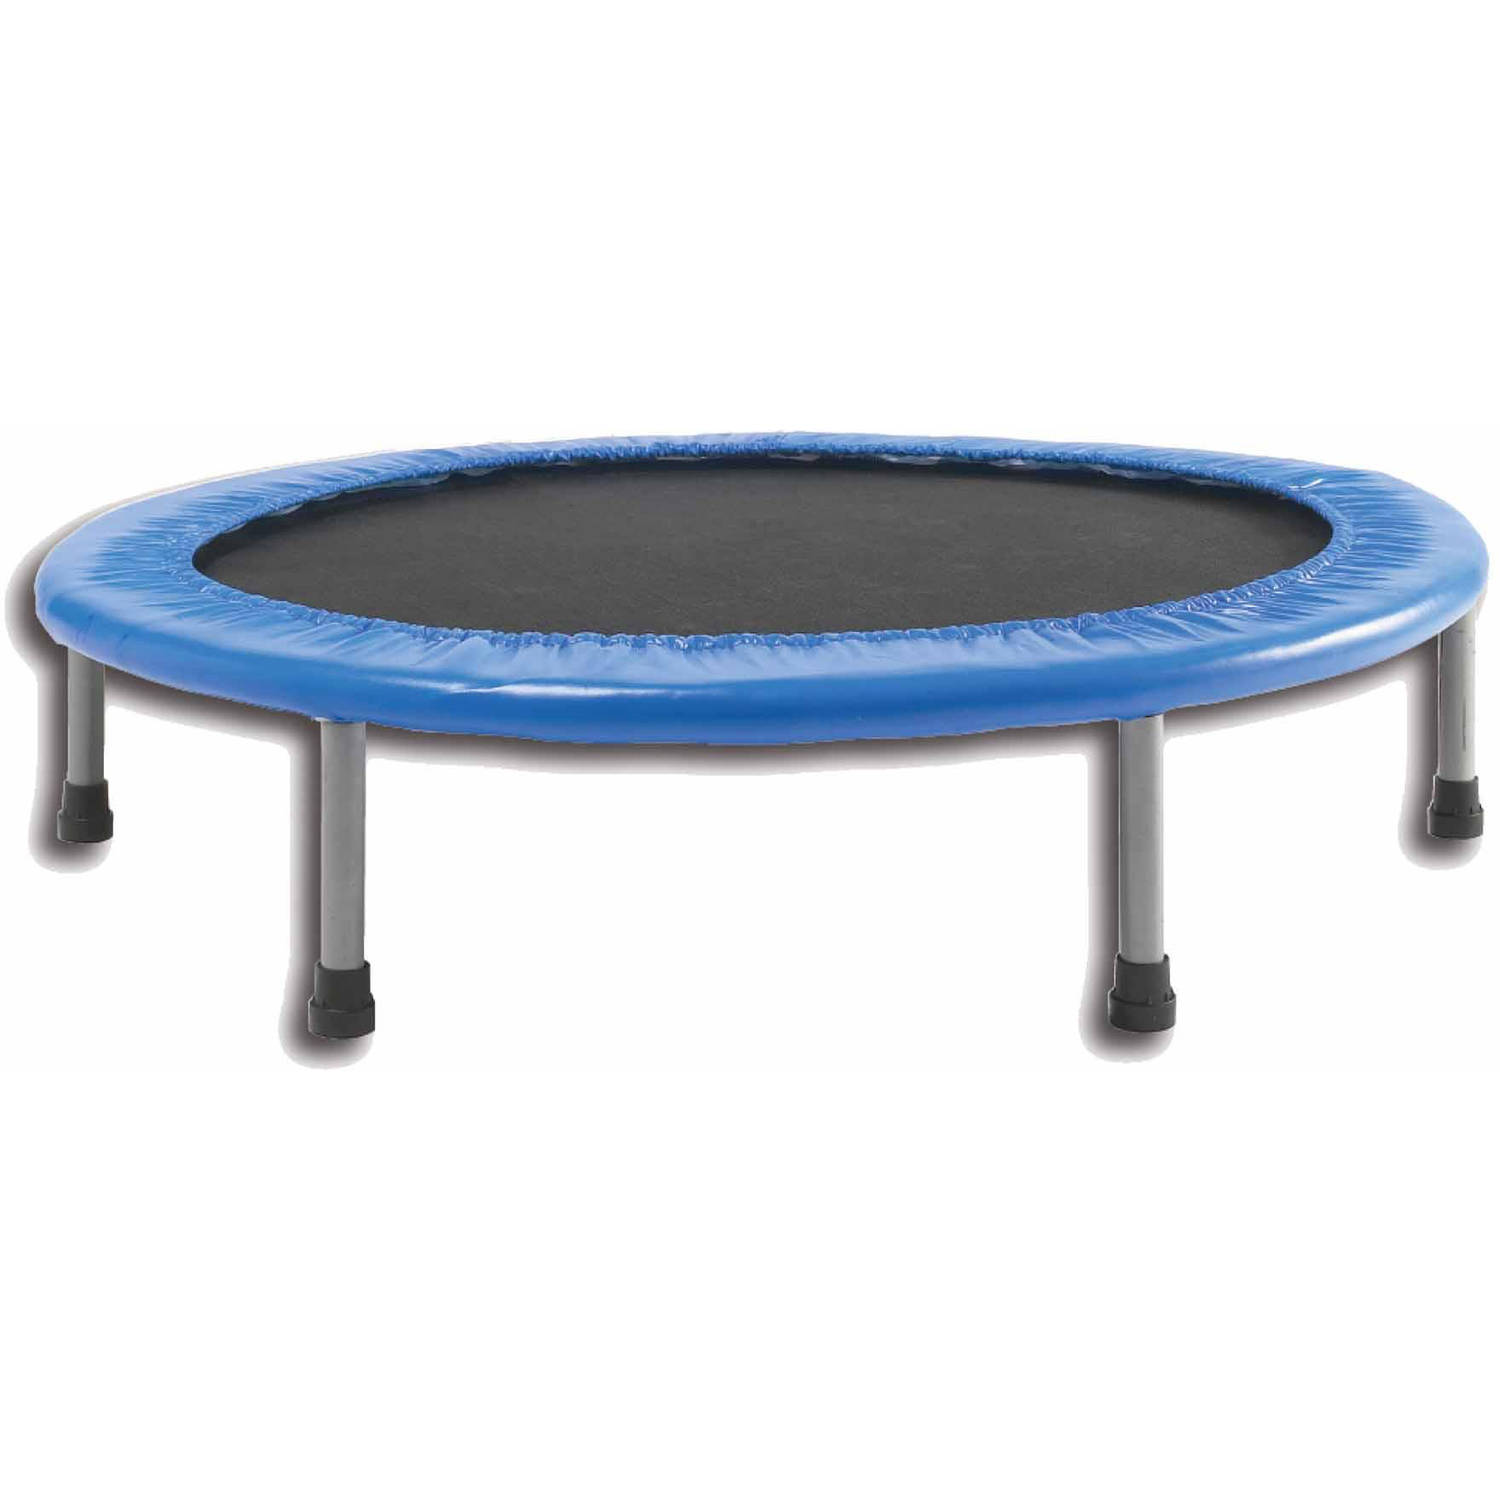 Airzone 38-Inch Fitness Trampoline, Blue - image 1 of 4